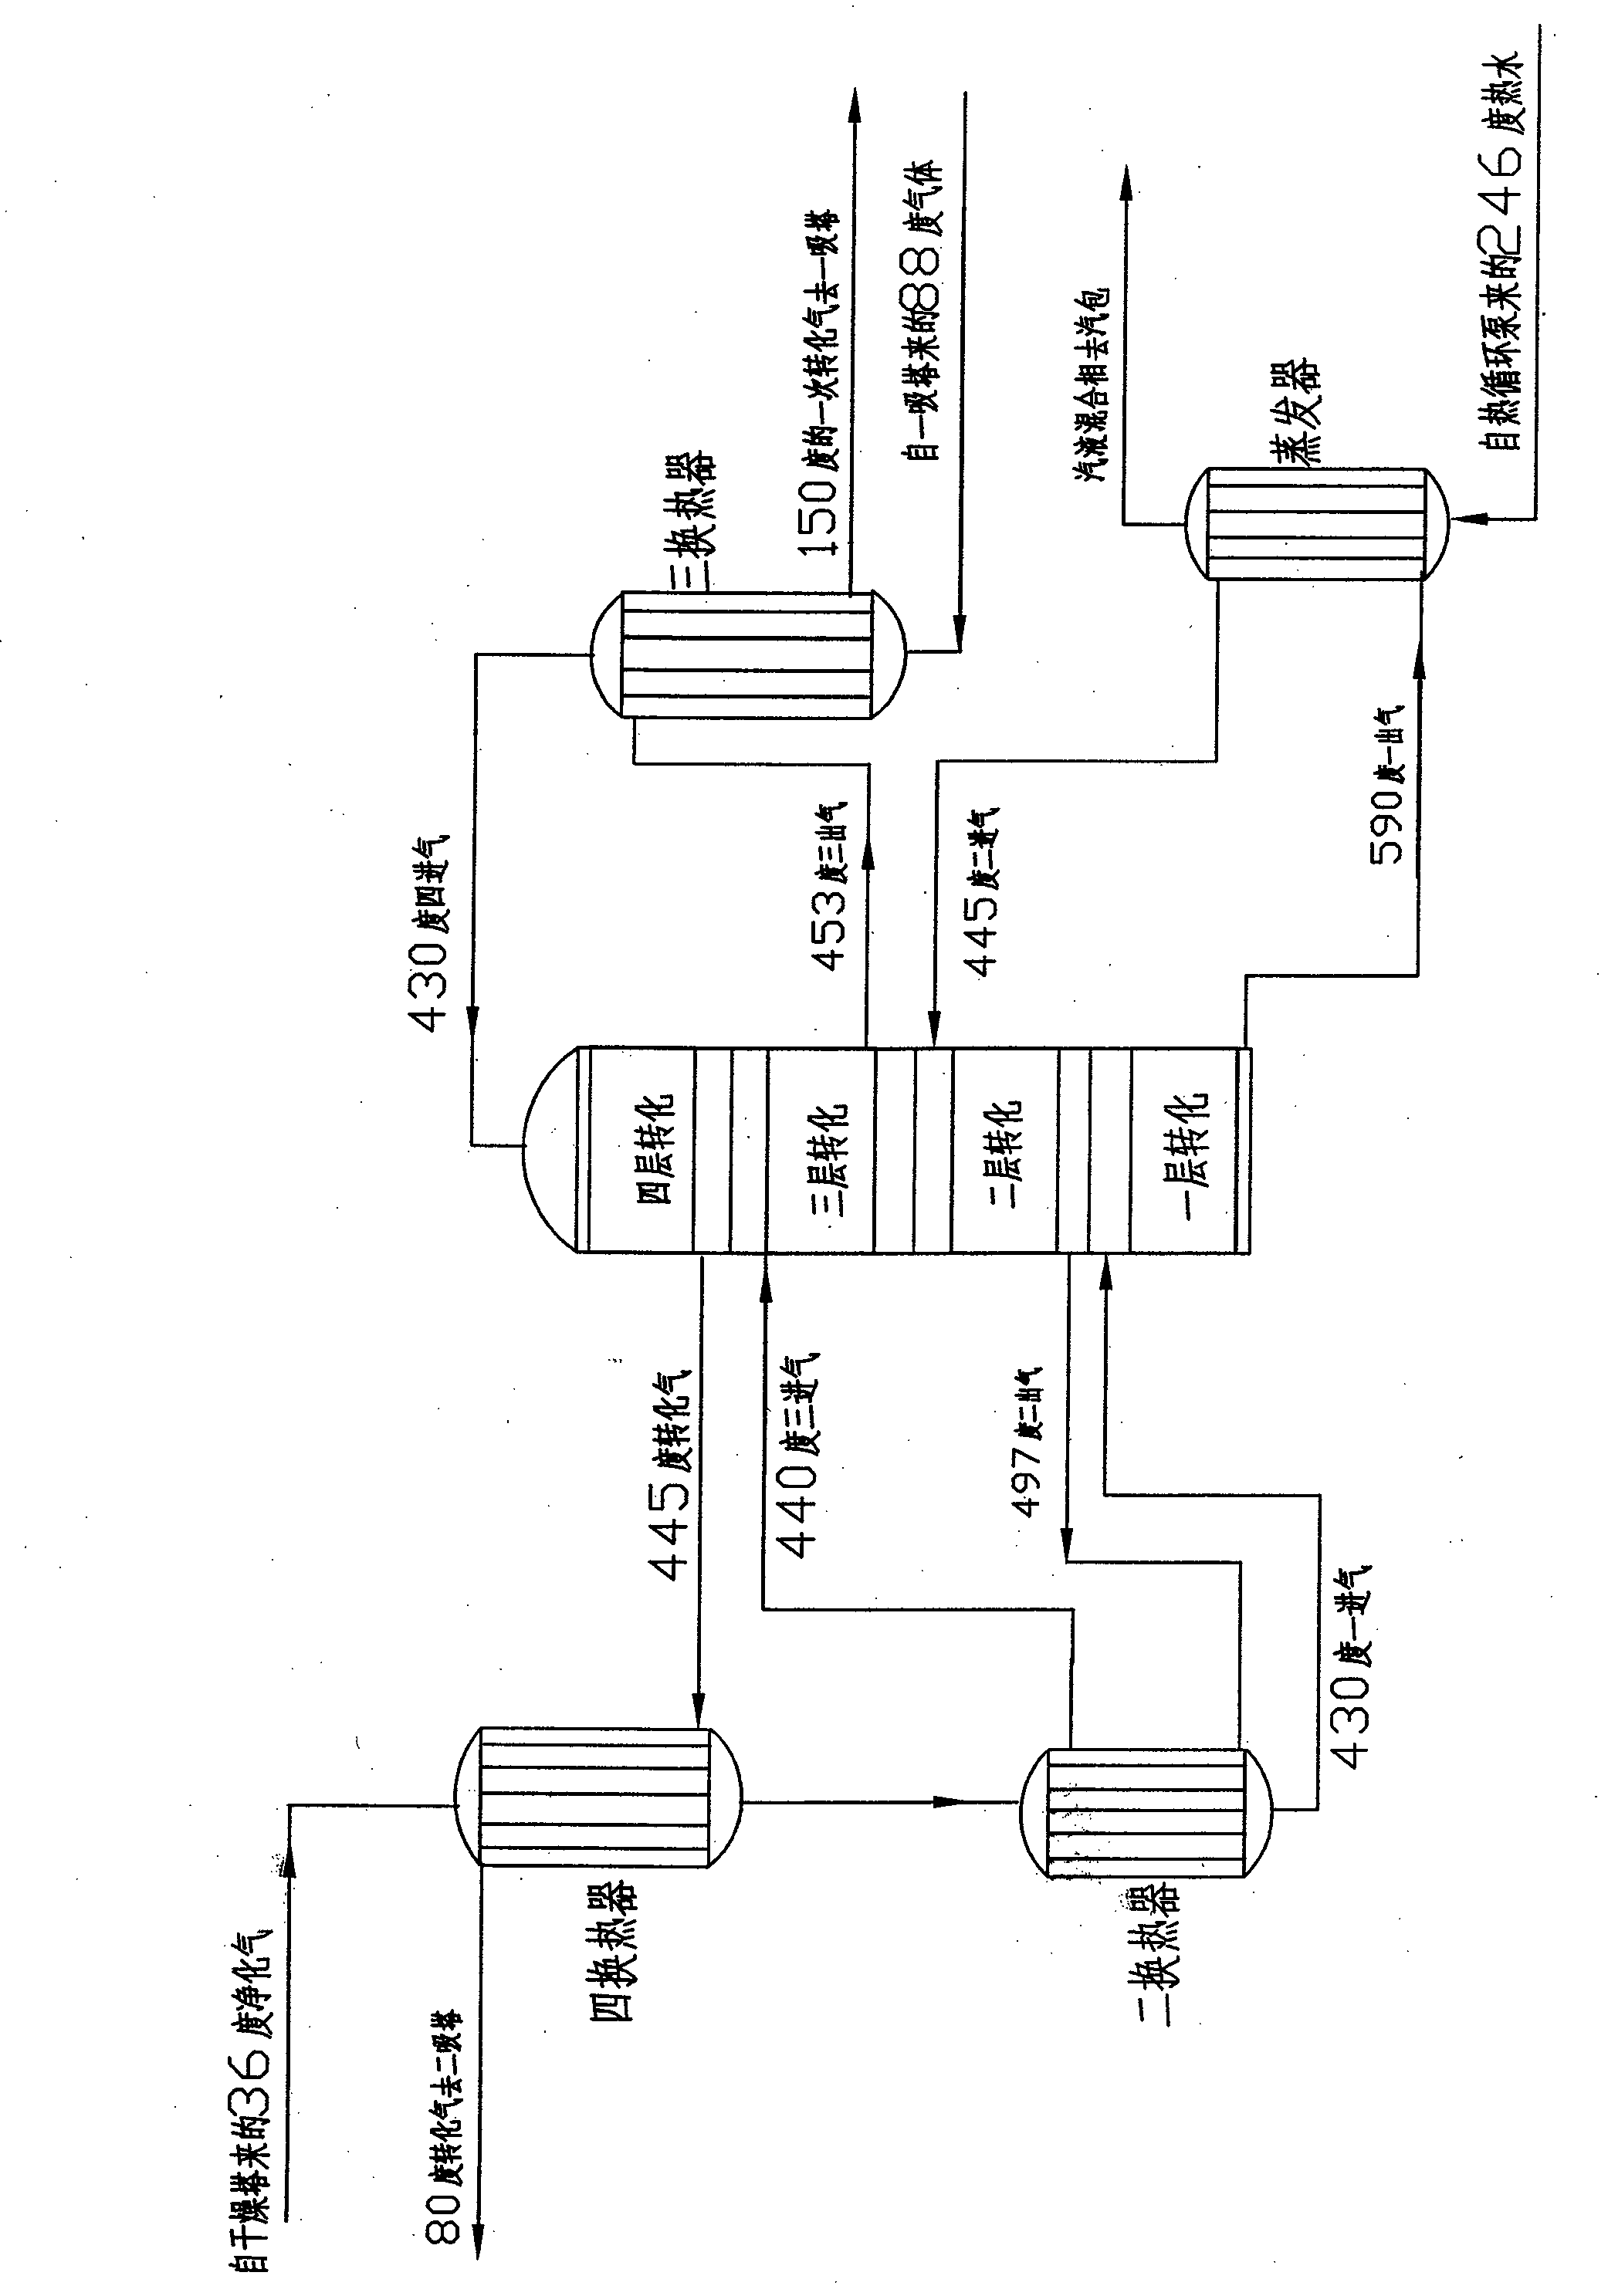 Process for efficiently recovering afterheat generated in the process of producing sulfuric acid from pyritic